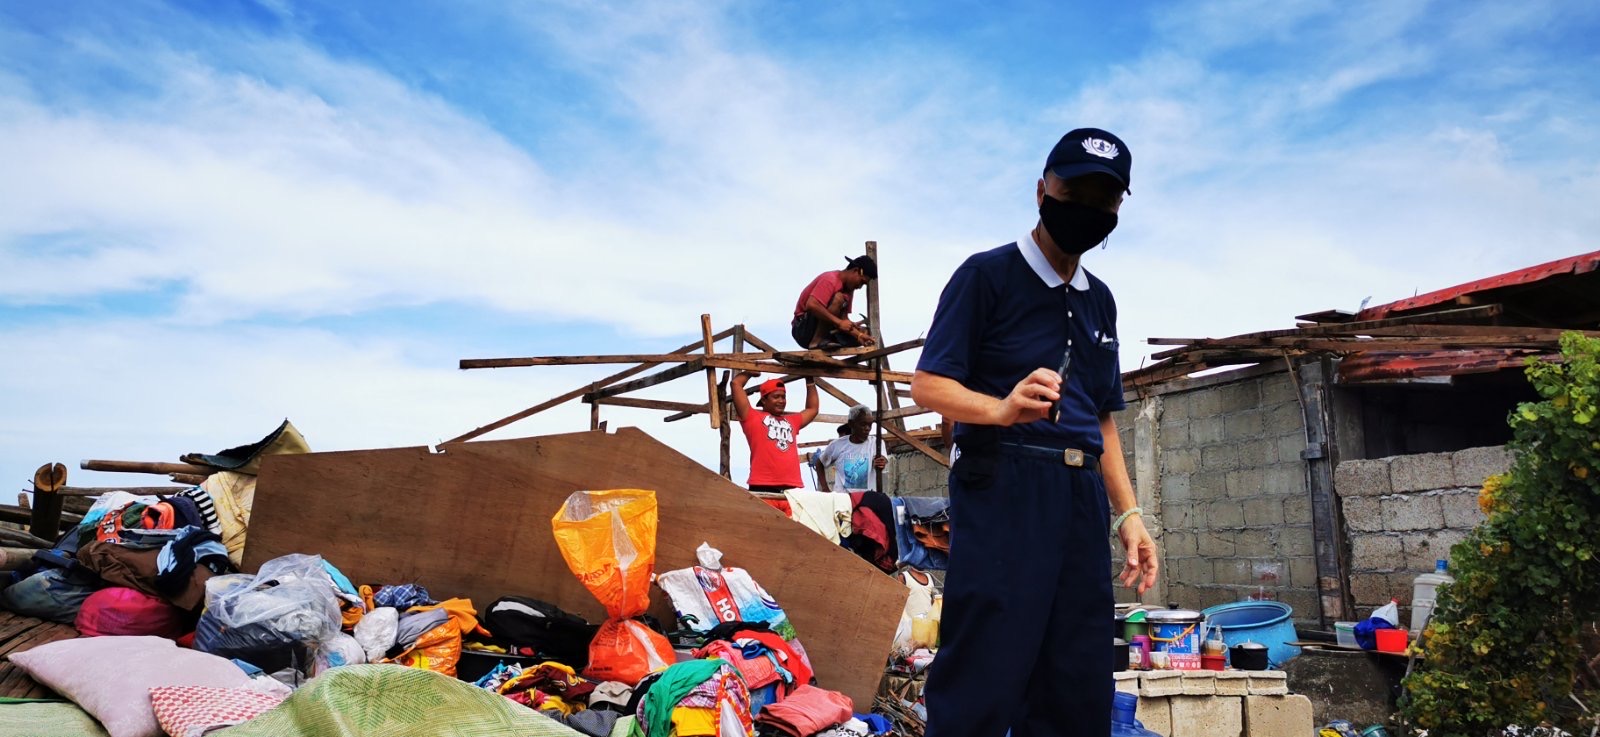 As a Tzu Chi volunteer documents the massive destruction of Typhoon Odette, locals in the background begin rebuilding efforts. 【Photo by Johnny Kwok】